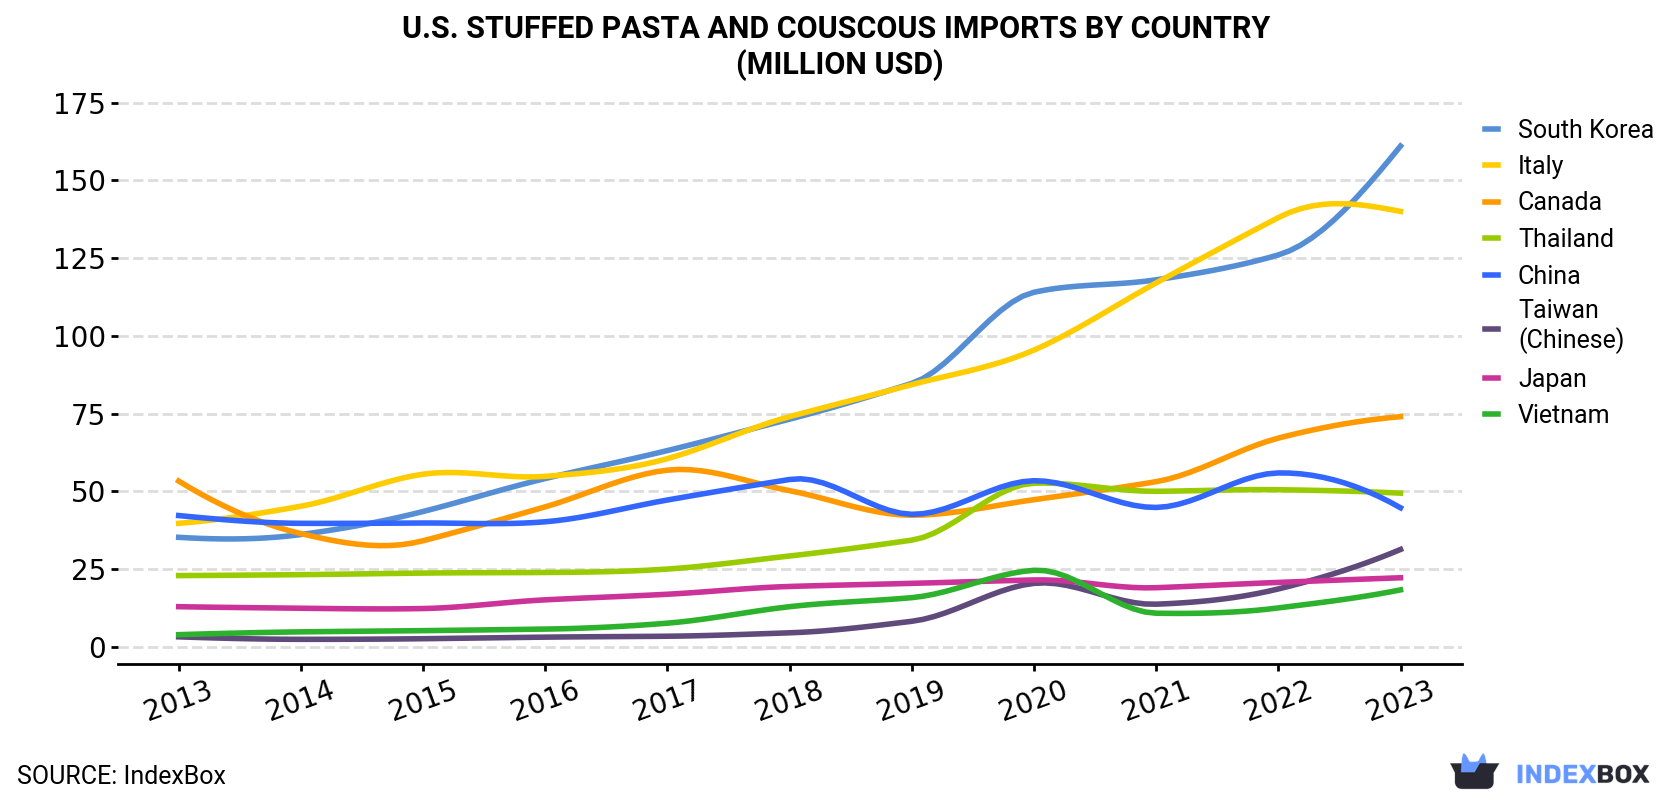 U.S. Stuffed Pasta and Couscous Imports By Country (Million USD)